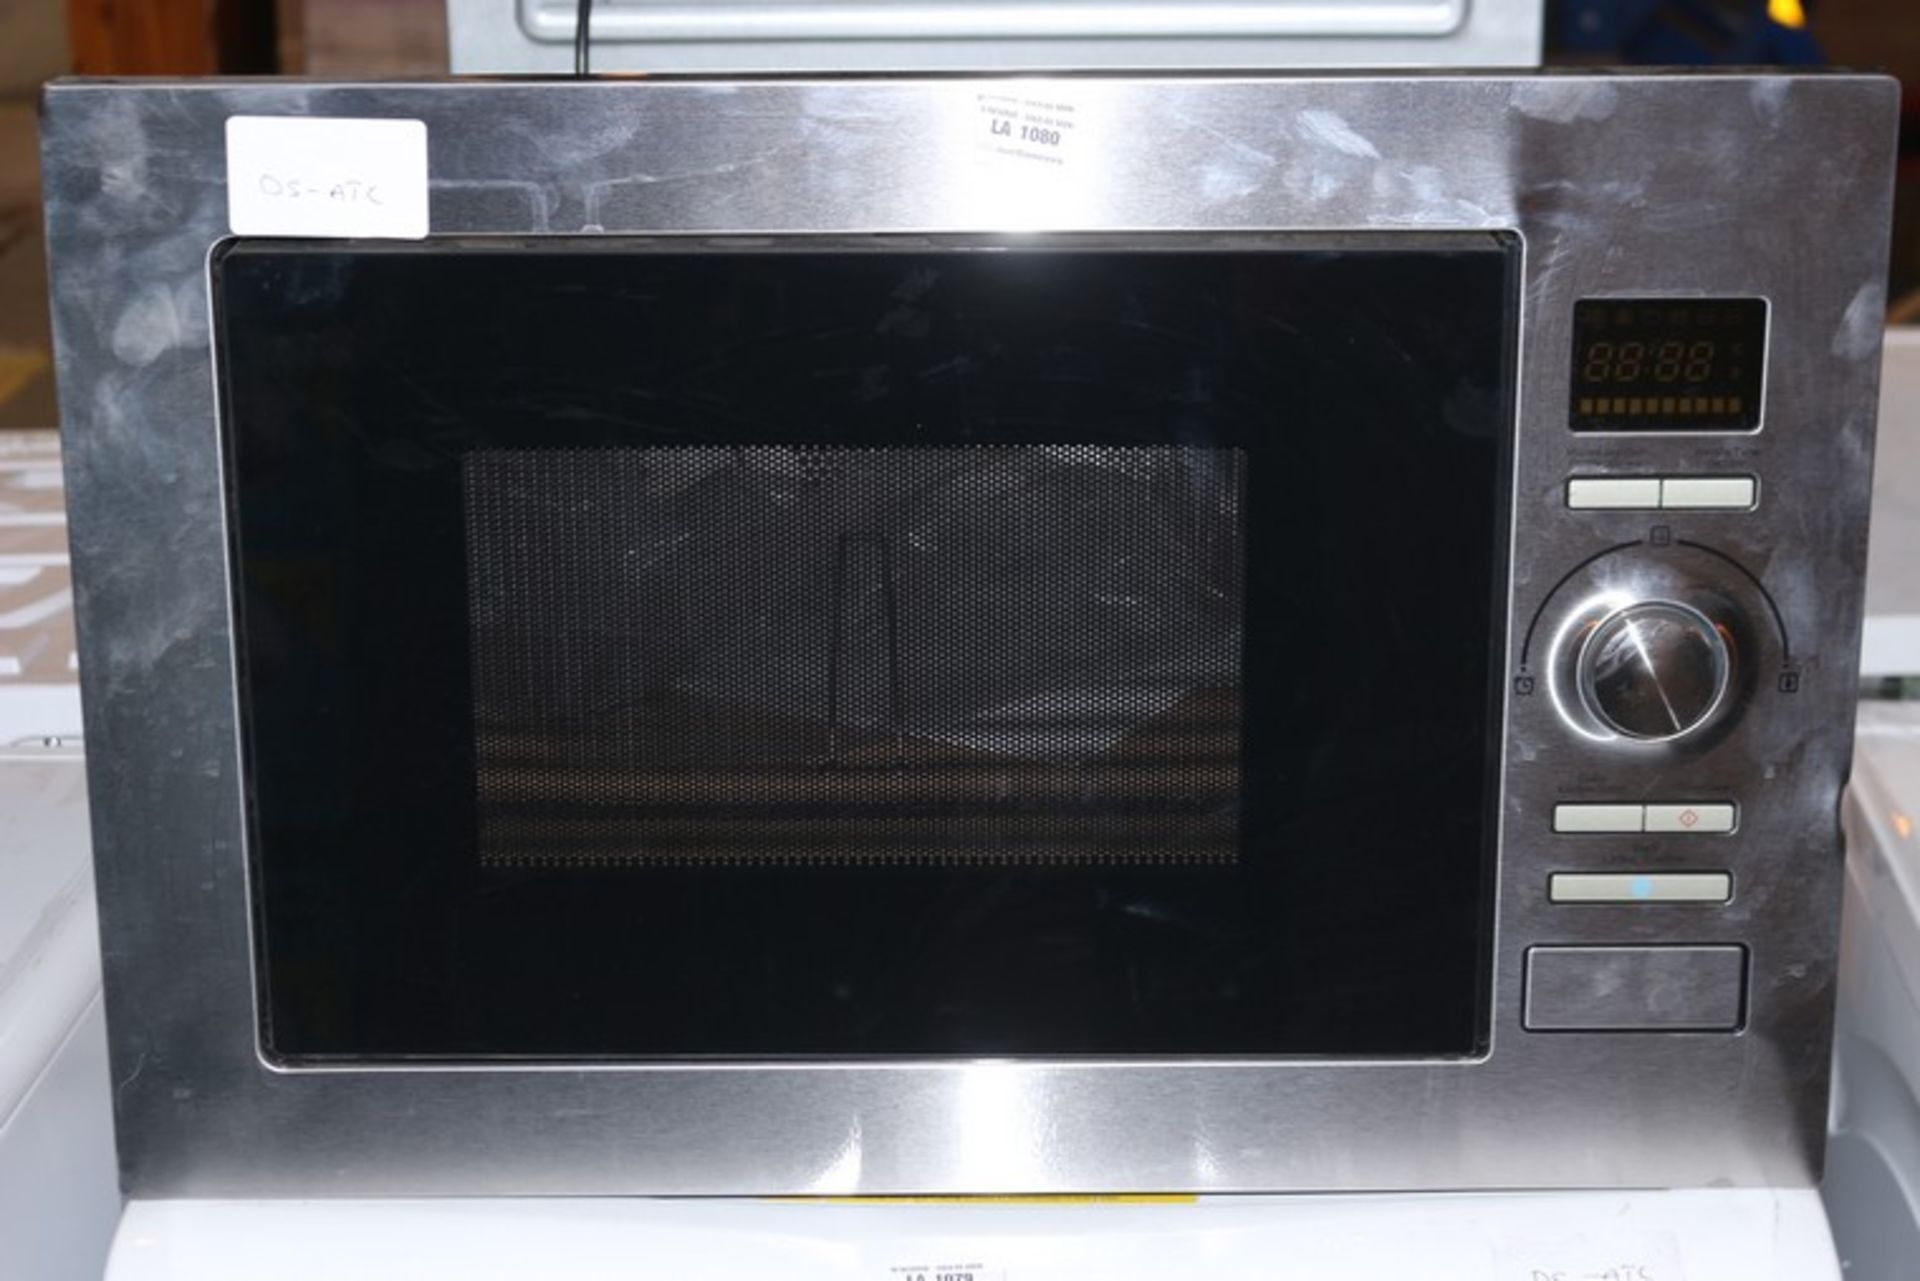 1 x STAINLESS STEEL SINGLE MICROWAVE OVEN (5.5.17) *PLEASE NOTE THAT THE BID PRICE IS MULTIPLIED